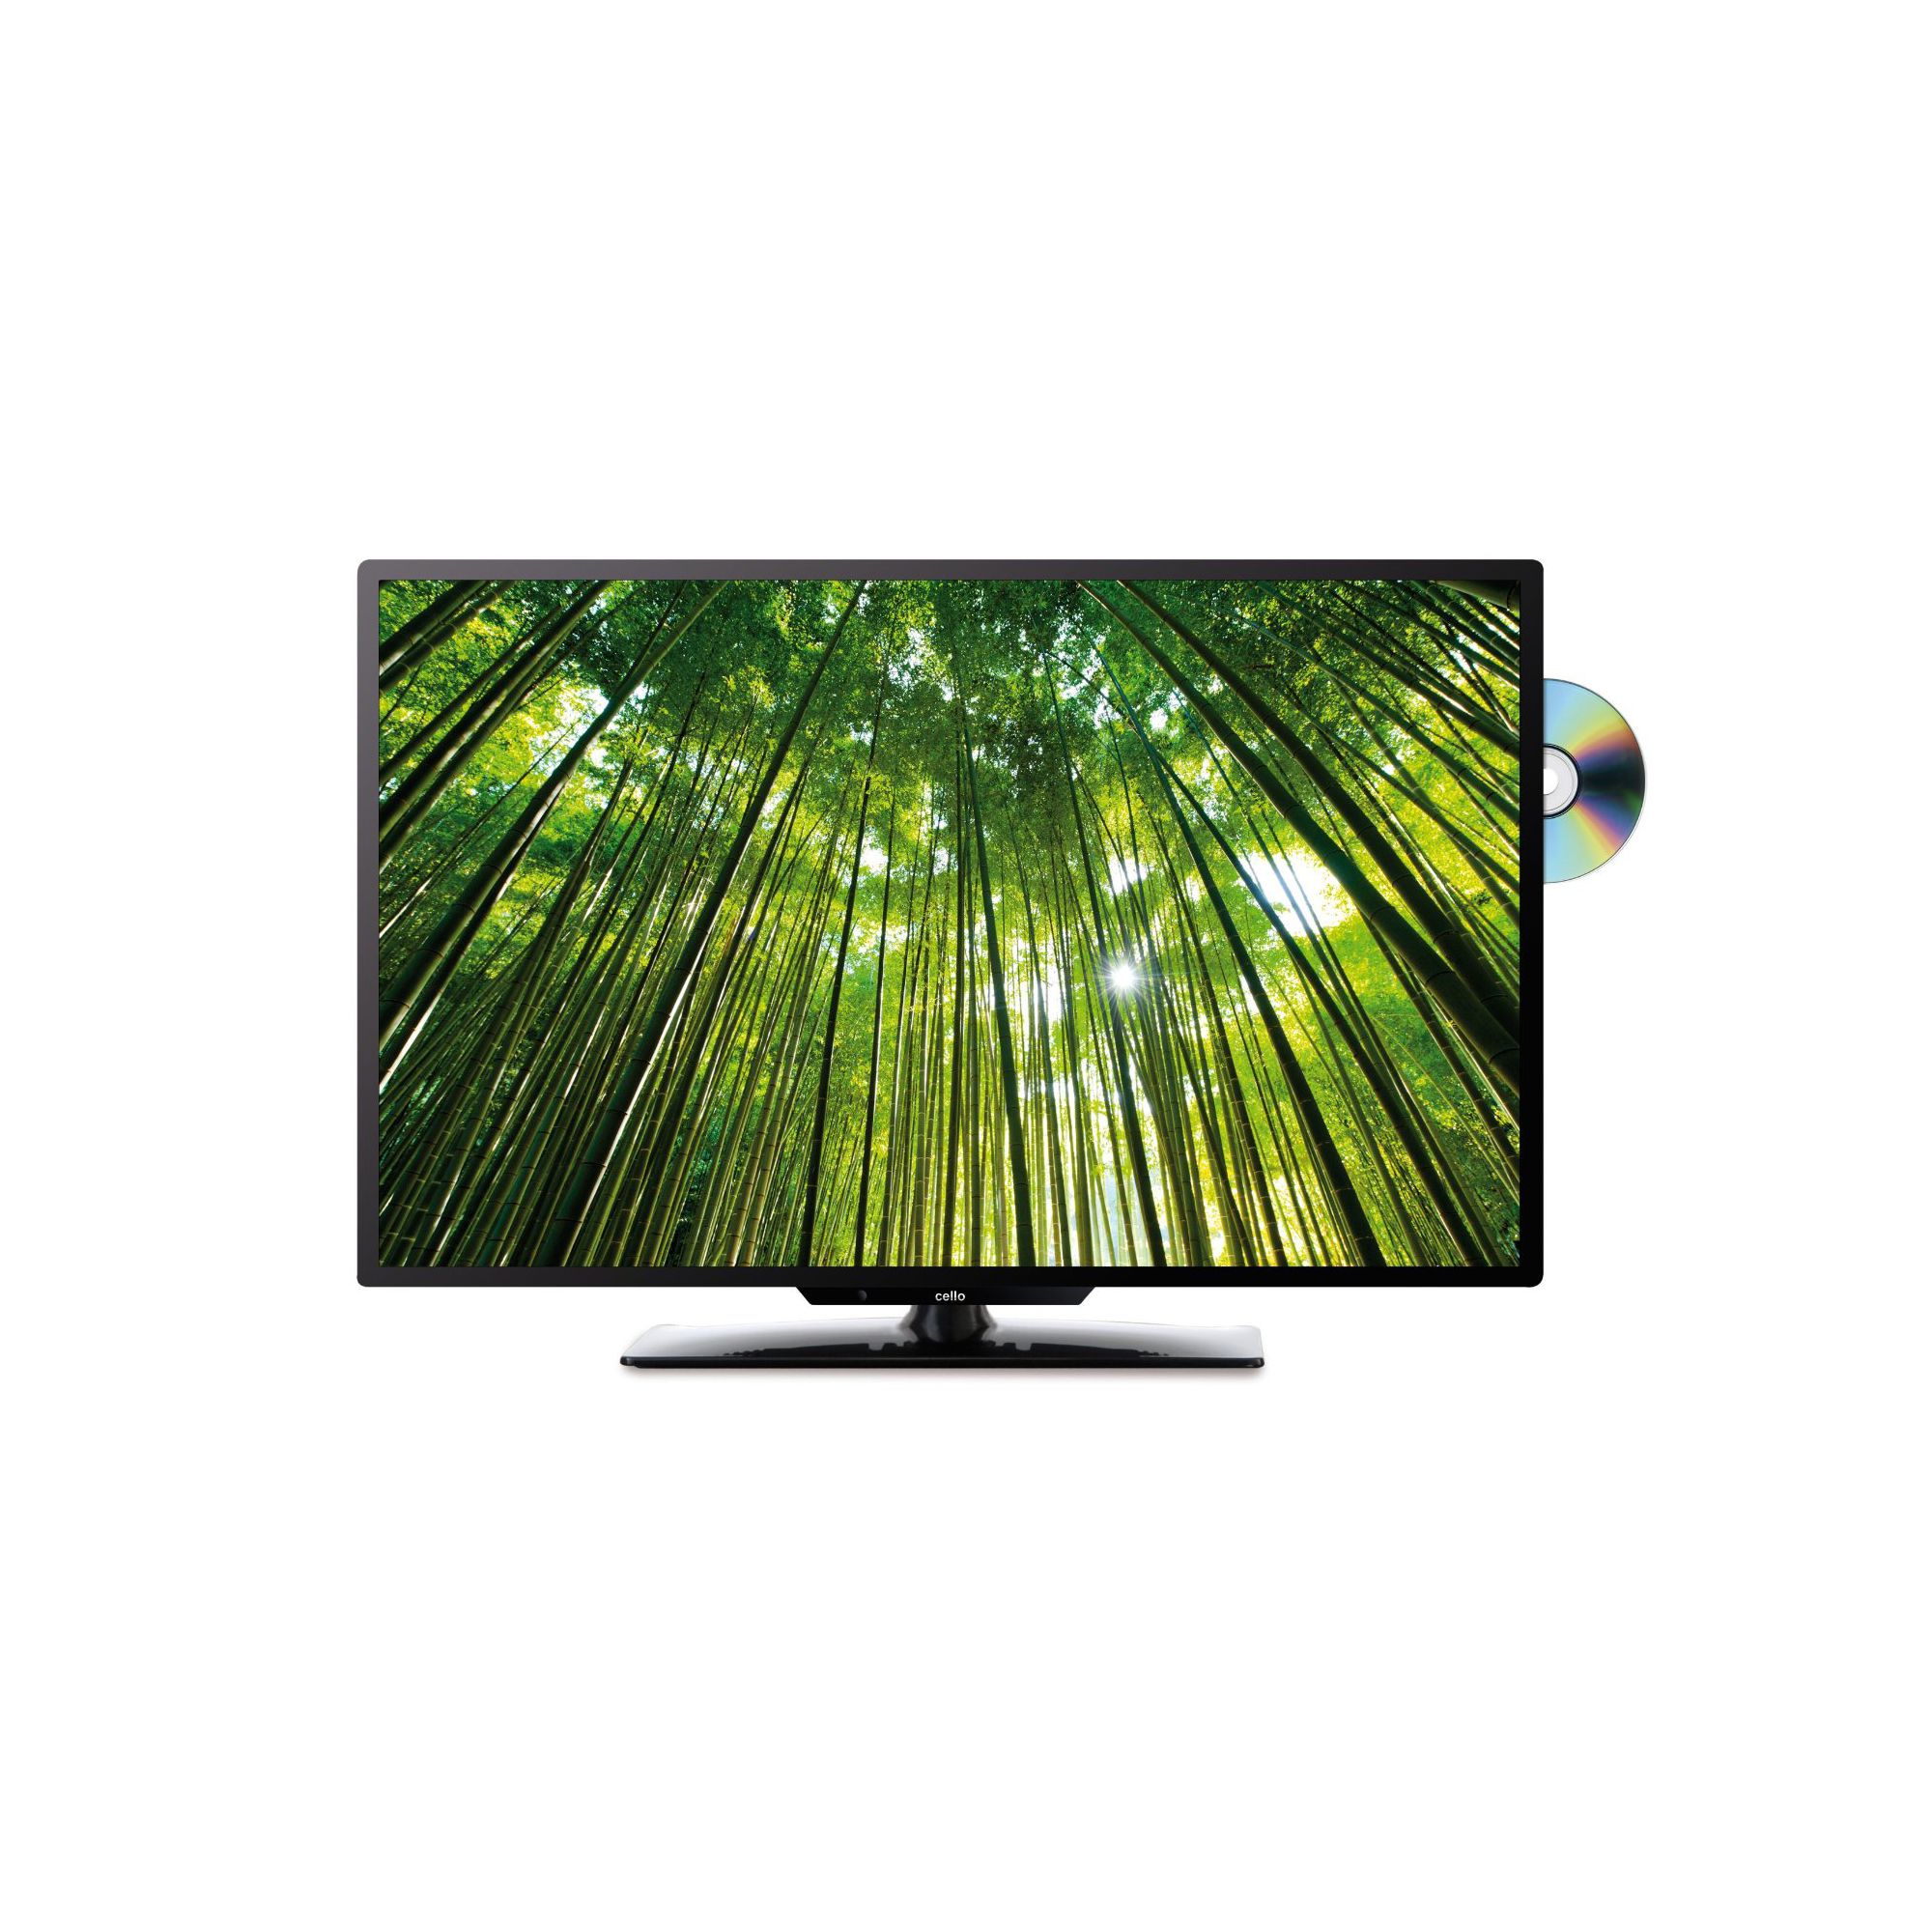 Cello C22103FQ 22 Inch Freeview LED TV with built-in DVD player